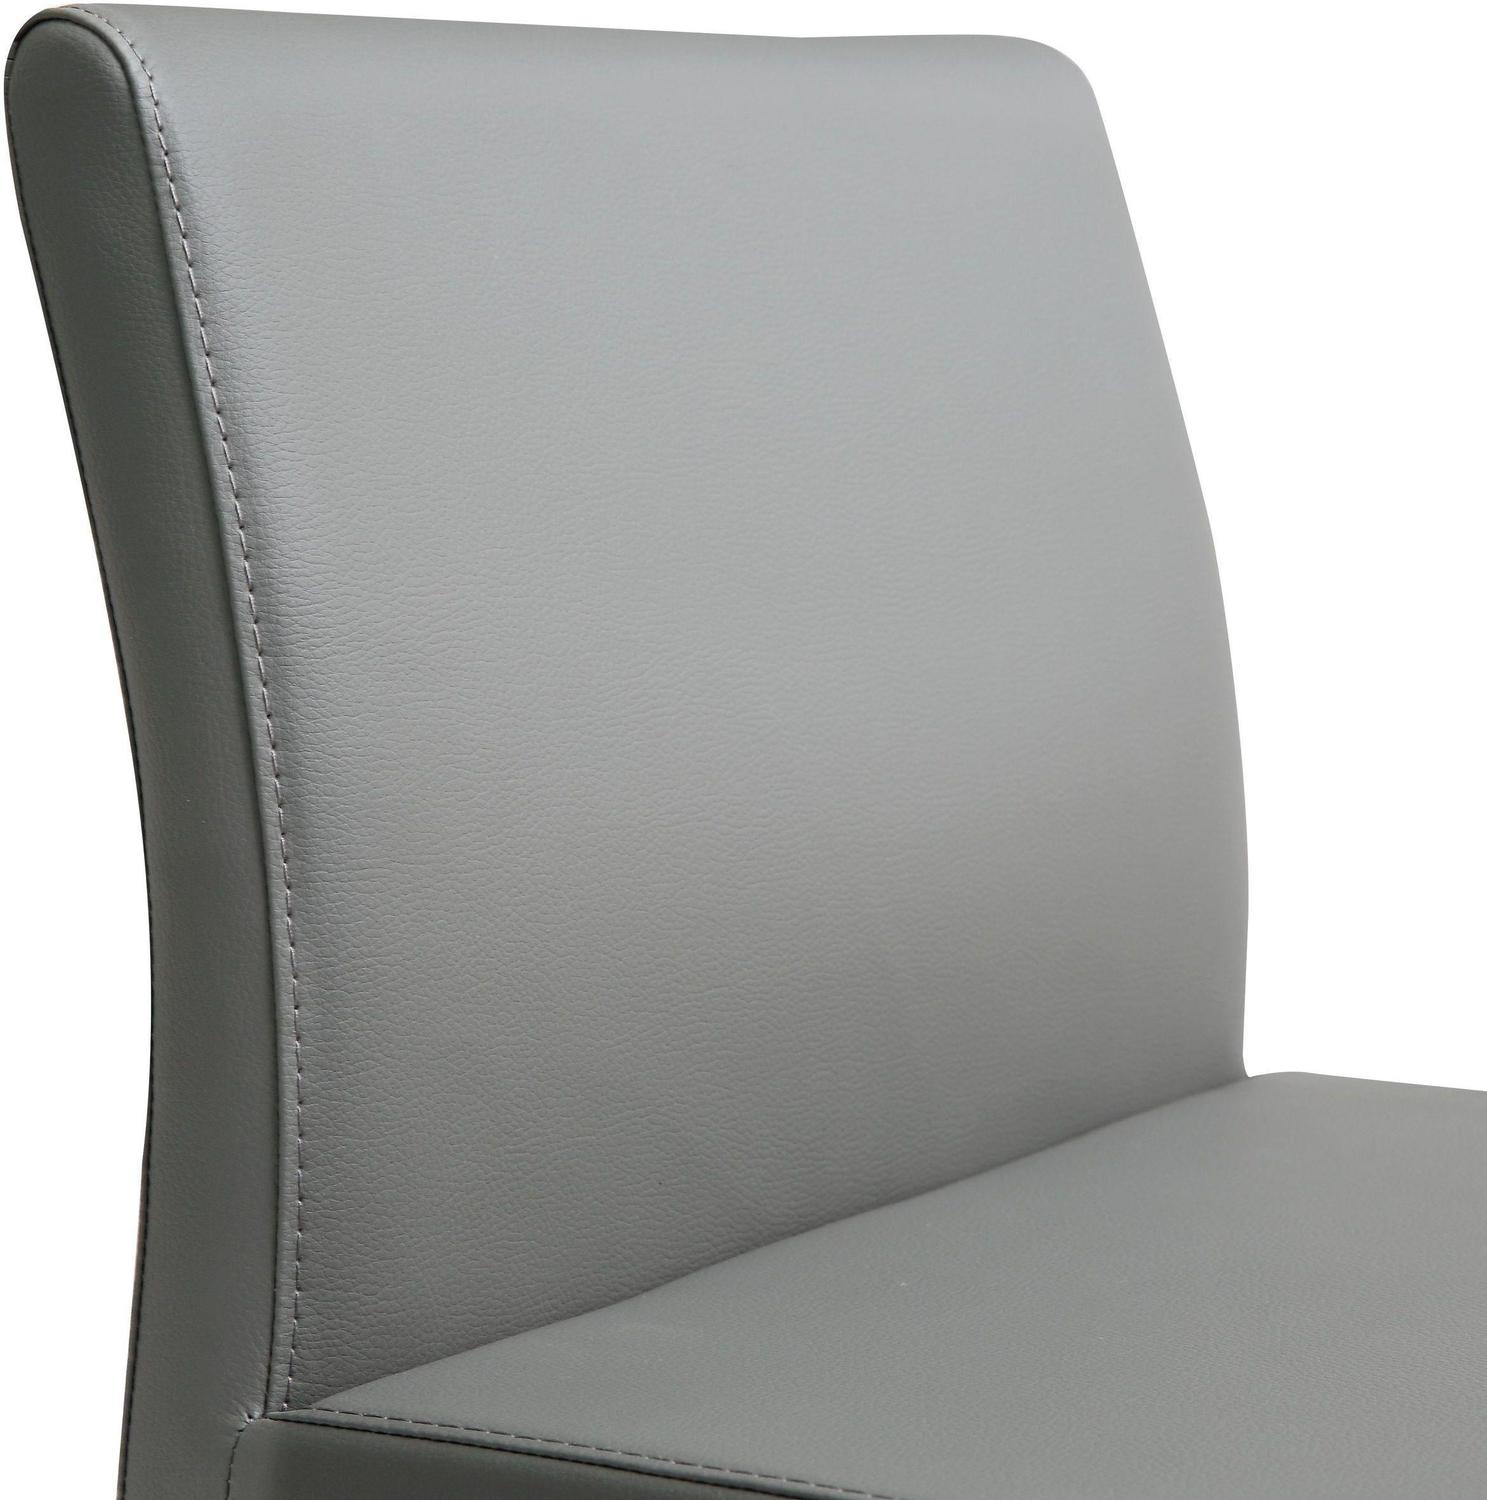 height chairs Tov Furniture Stools Grey